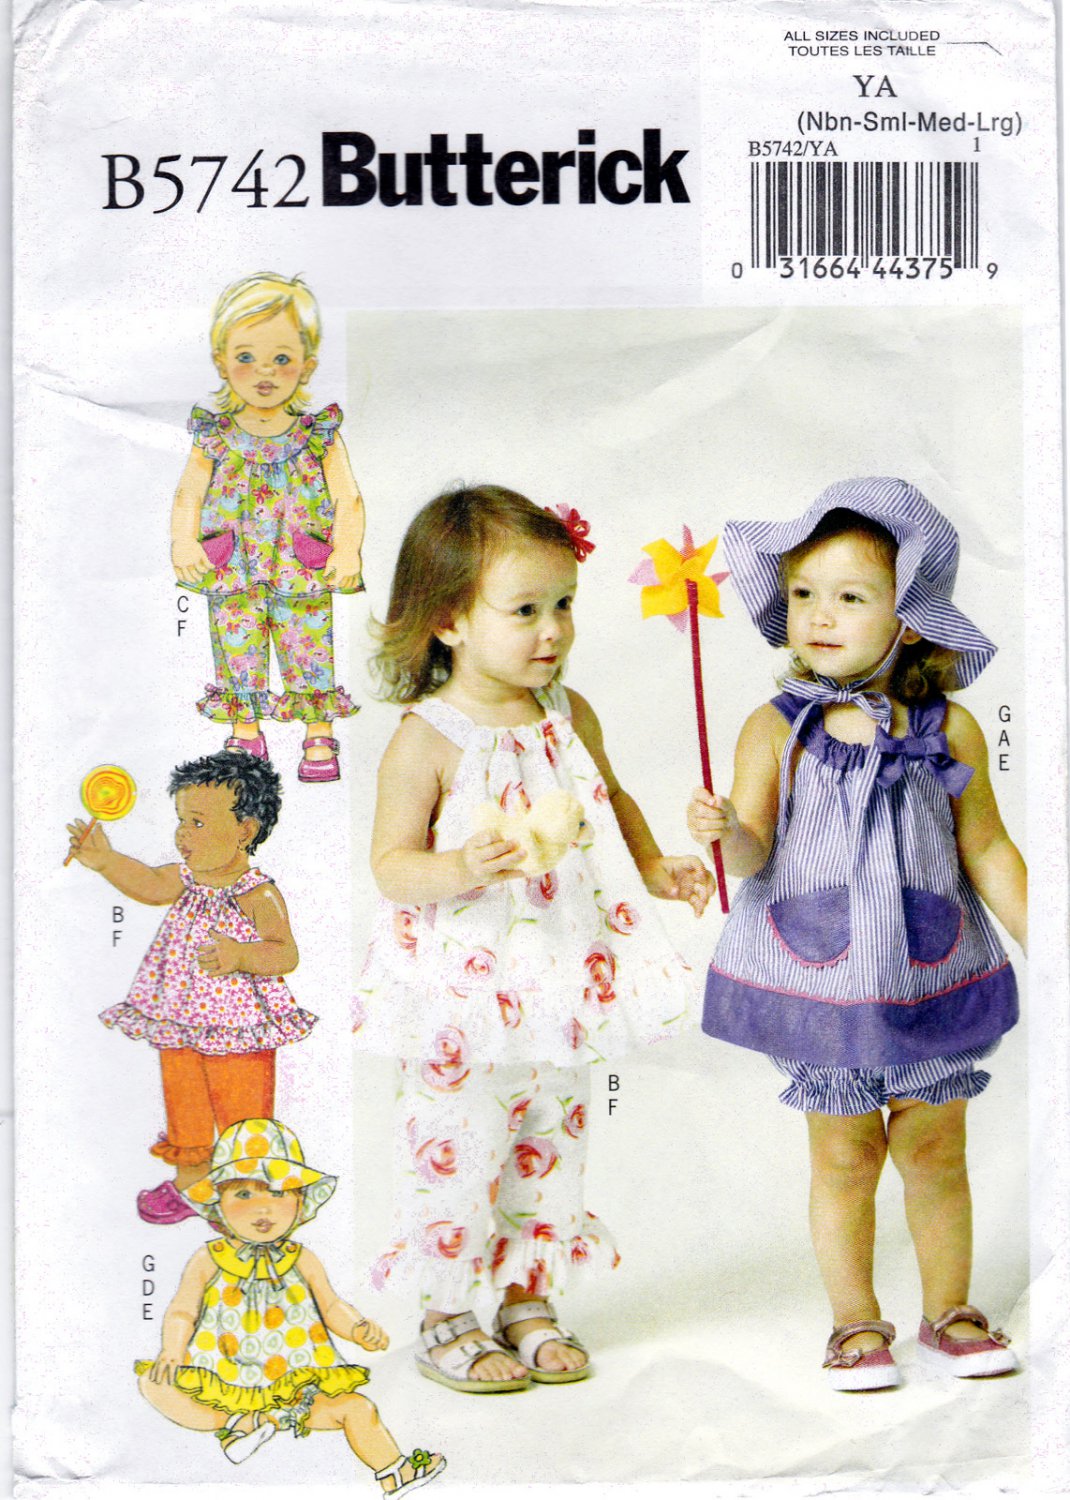 Butterick B5742 5742 Infant Girls Top Bloomers Pants Hat Sewing Pattern Kids Sizes Nbn-Sml-Med-Lrg